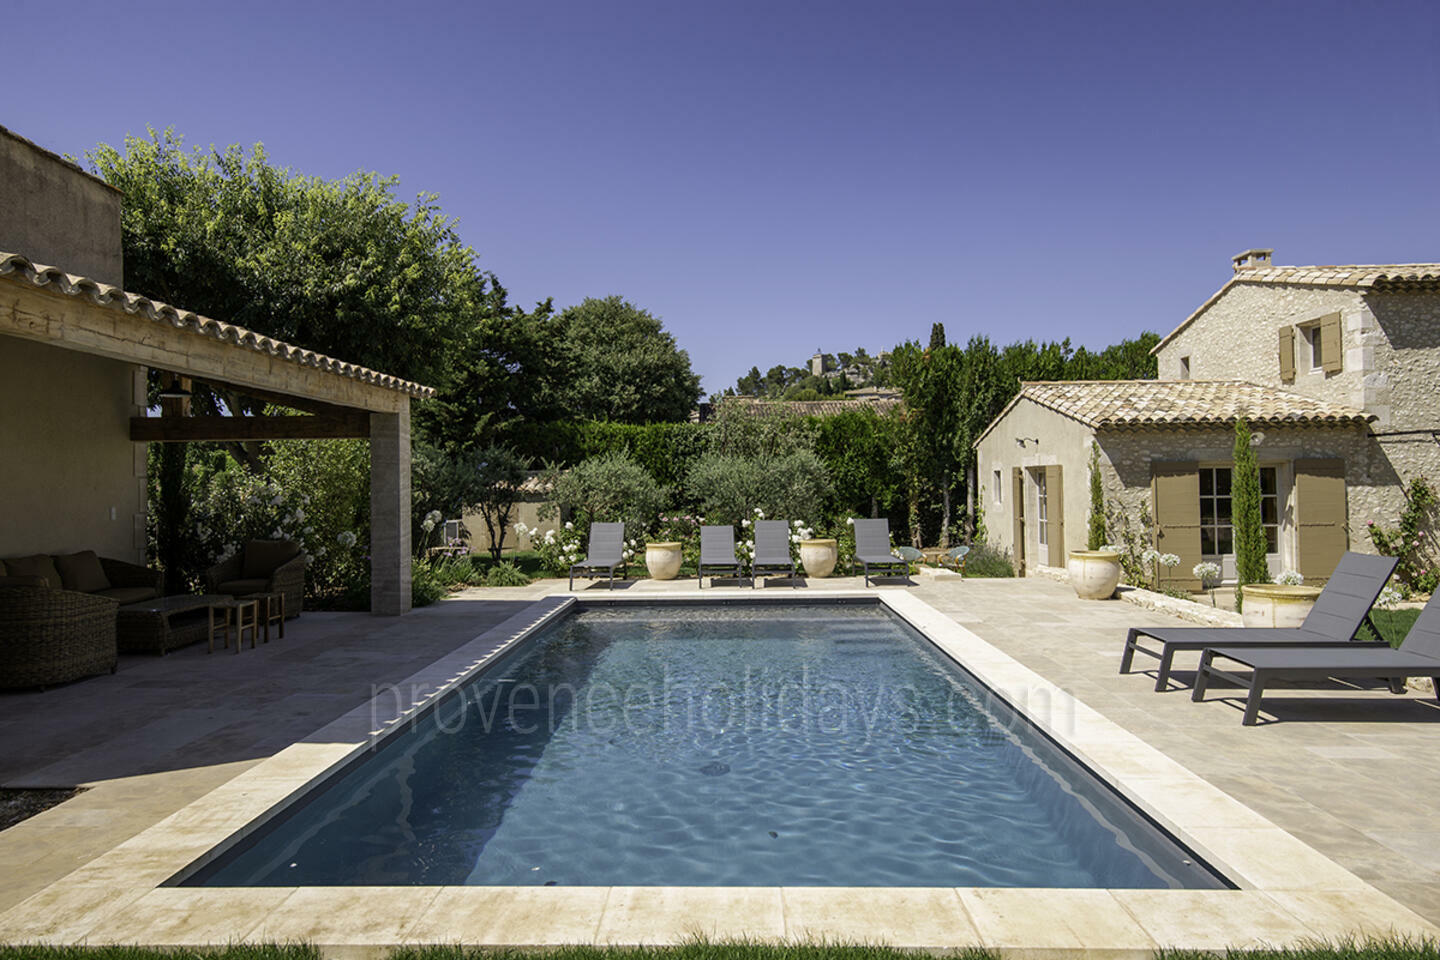 Tastefully Decorated Villa with Heated Pool in Eygalières 1 - Maison Eygalières: Villa: Pool